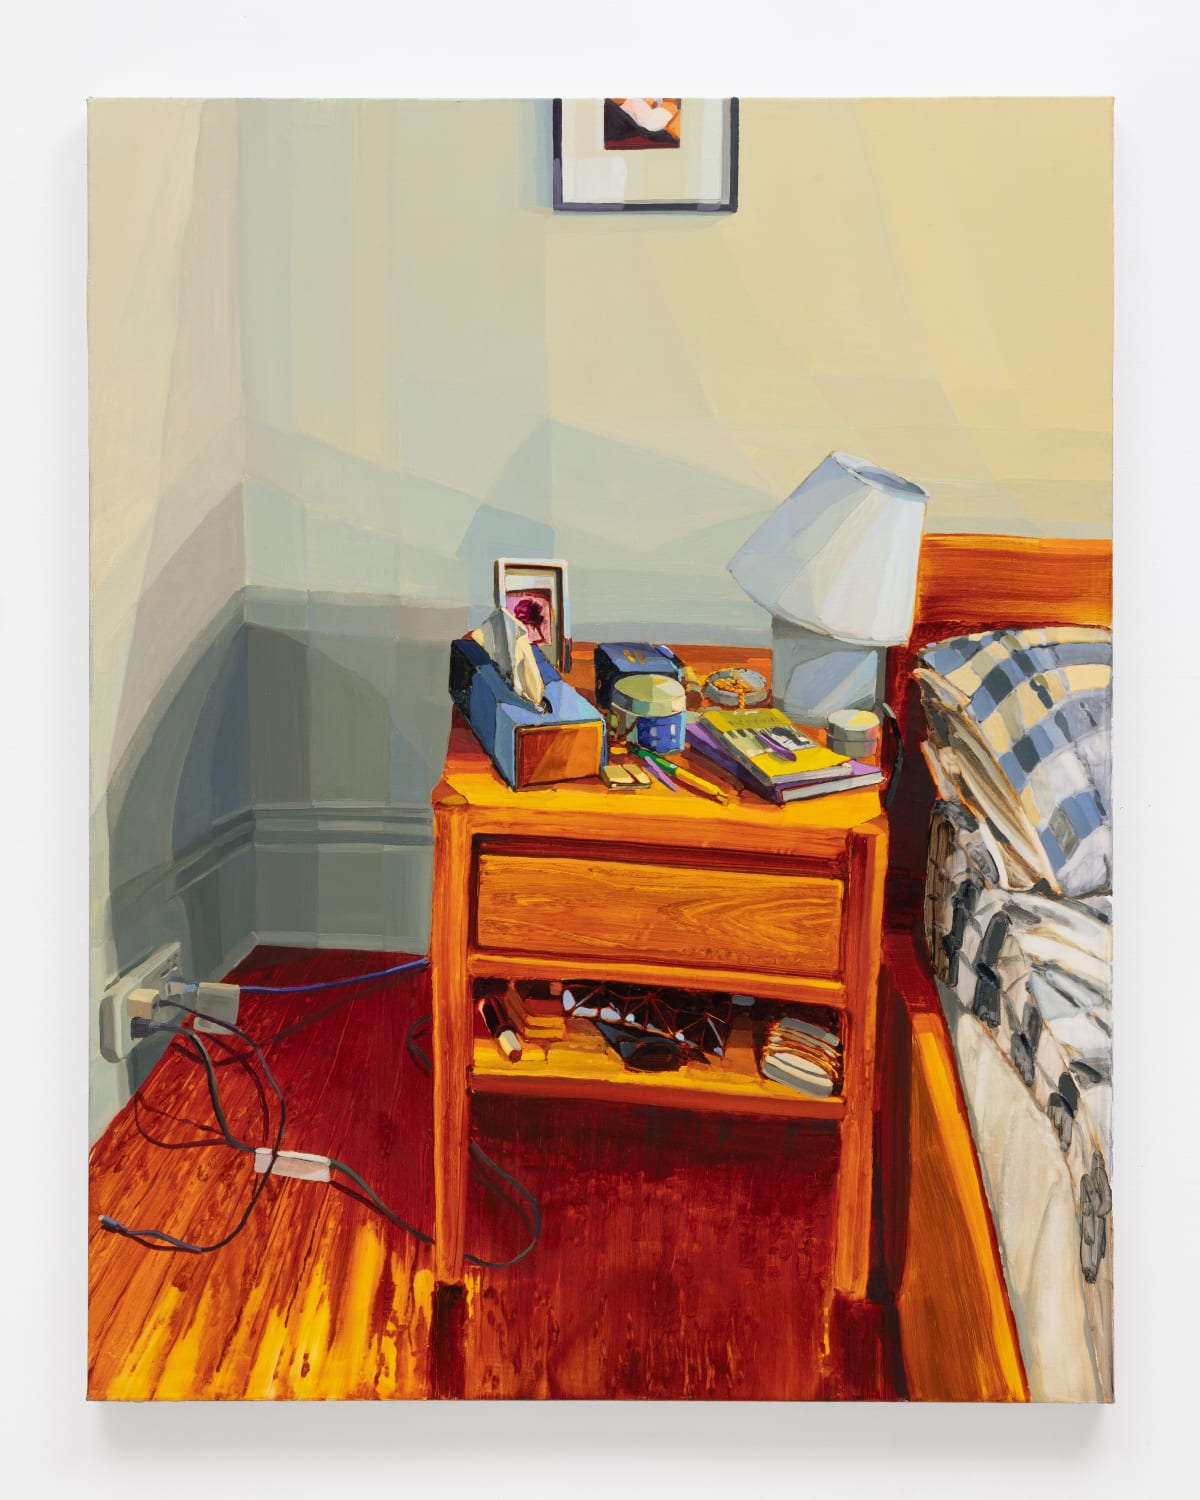 Keiran Brennan Hinton, Bedside Table, 2023. Oil on linen, 56 x 44 inches. Photo by Laura Fin.